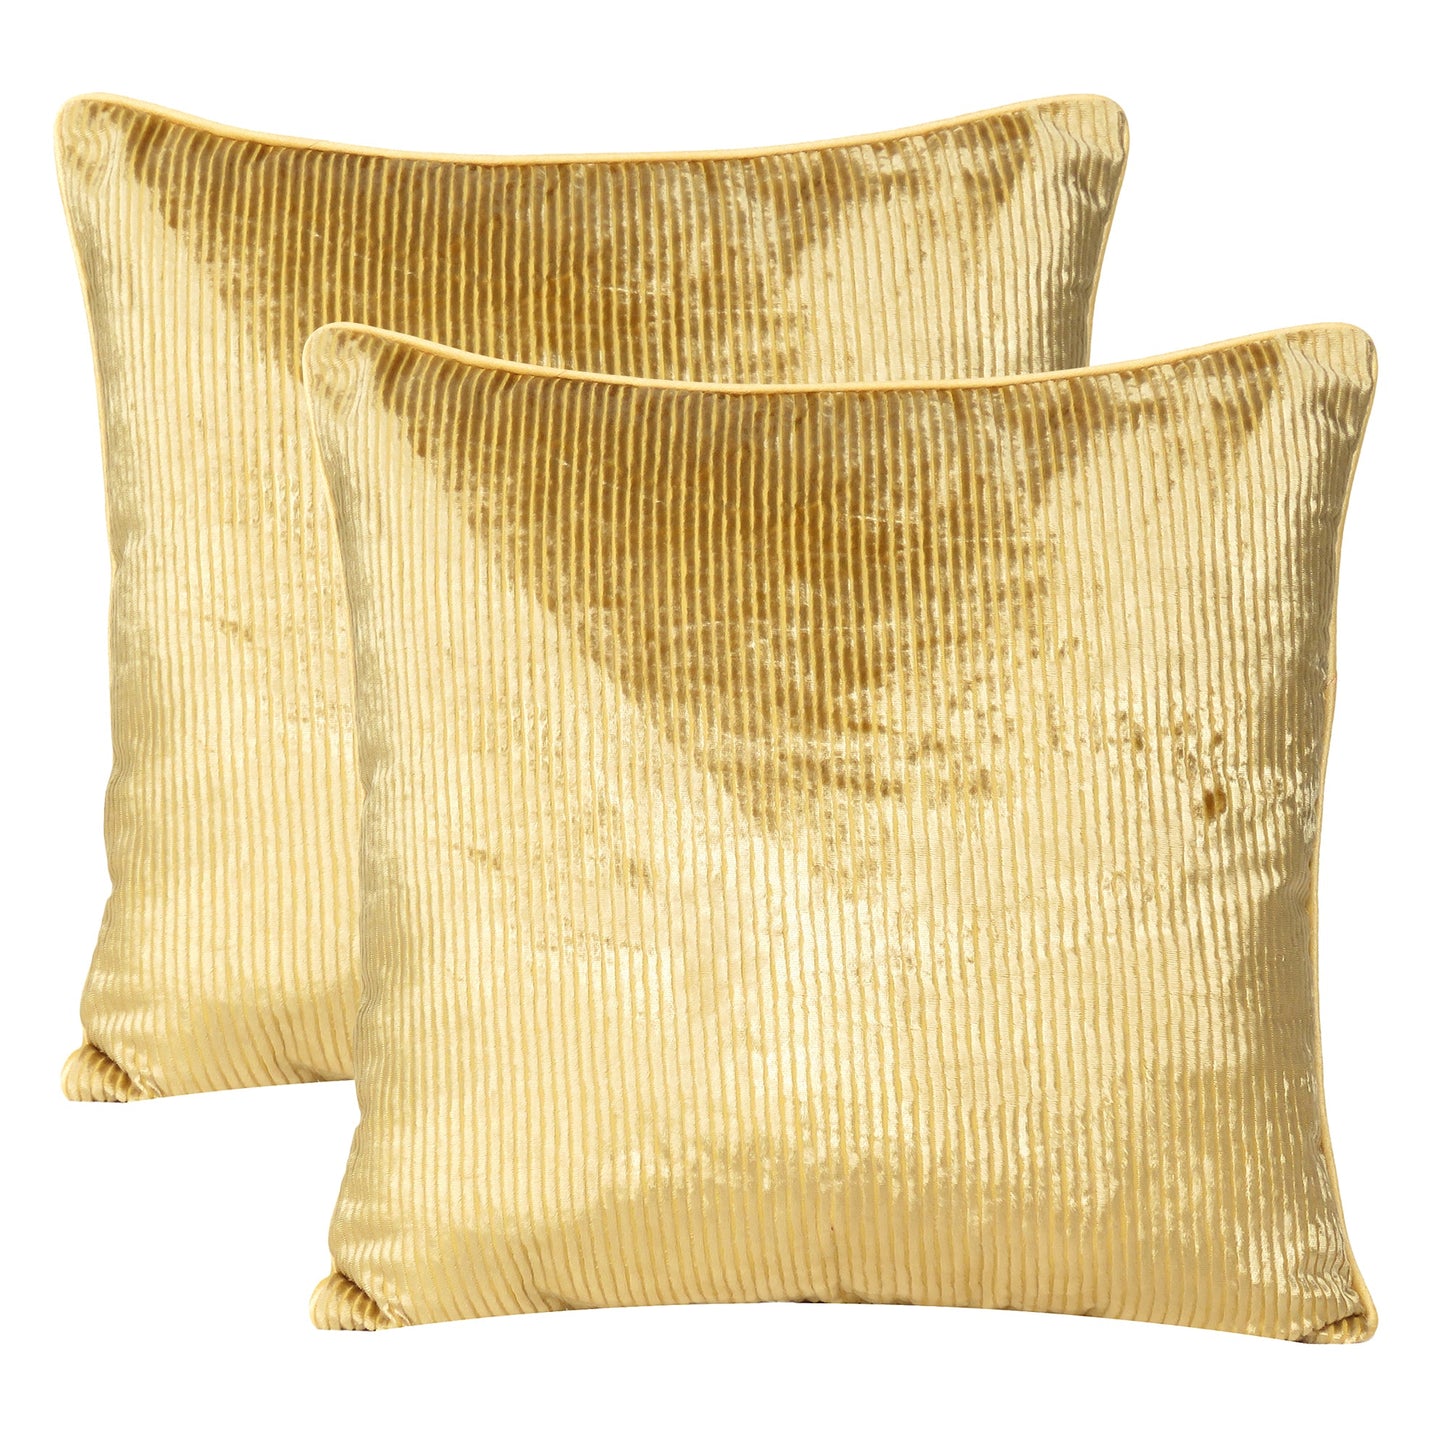 Solid Corduroy Cushion Cover in Set of 2 - Golden